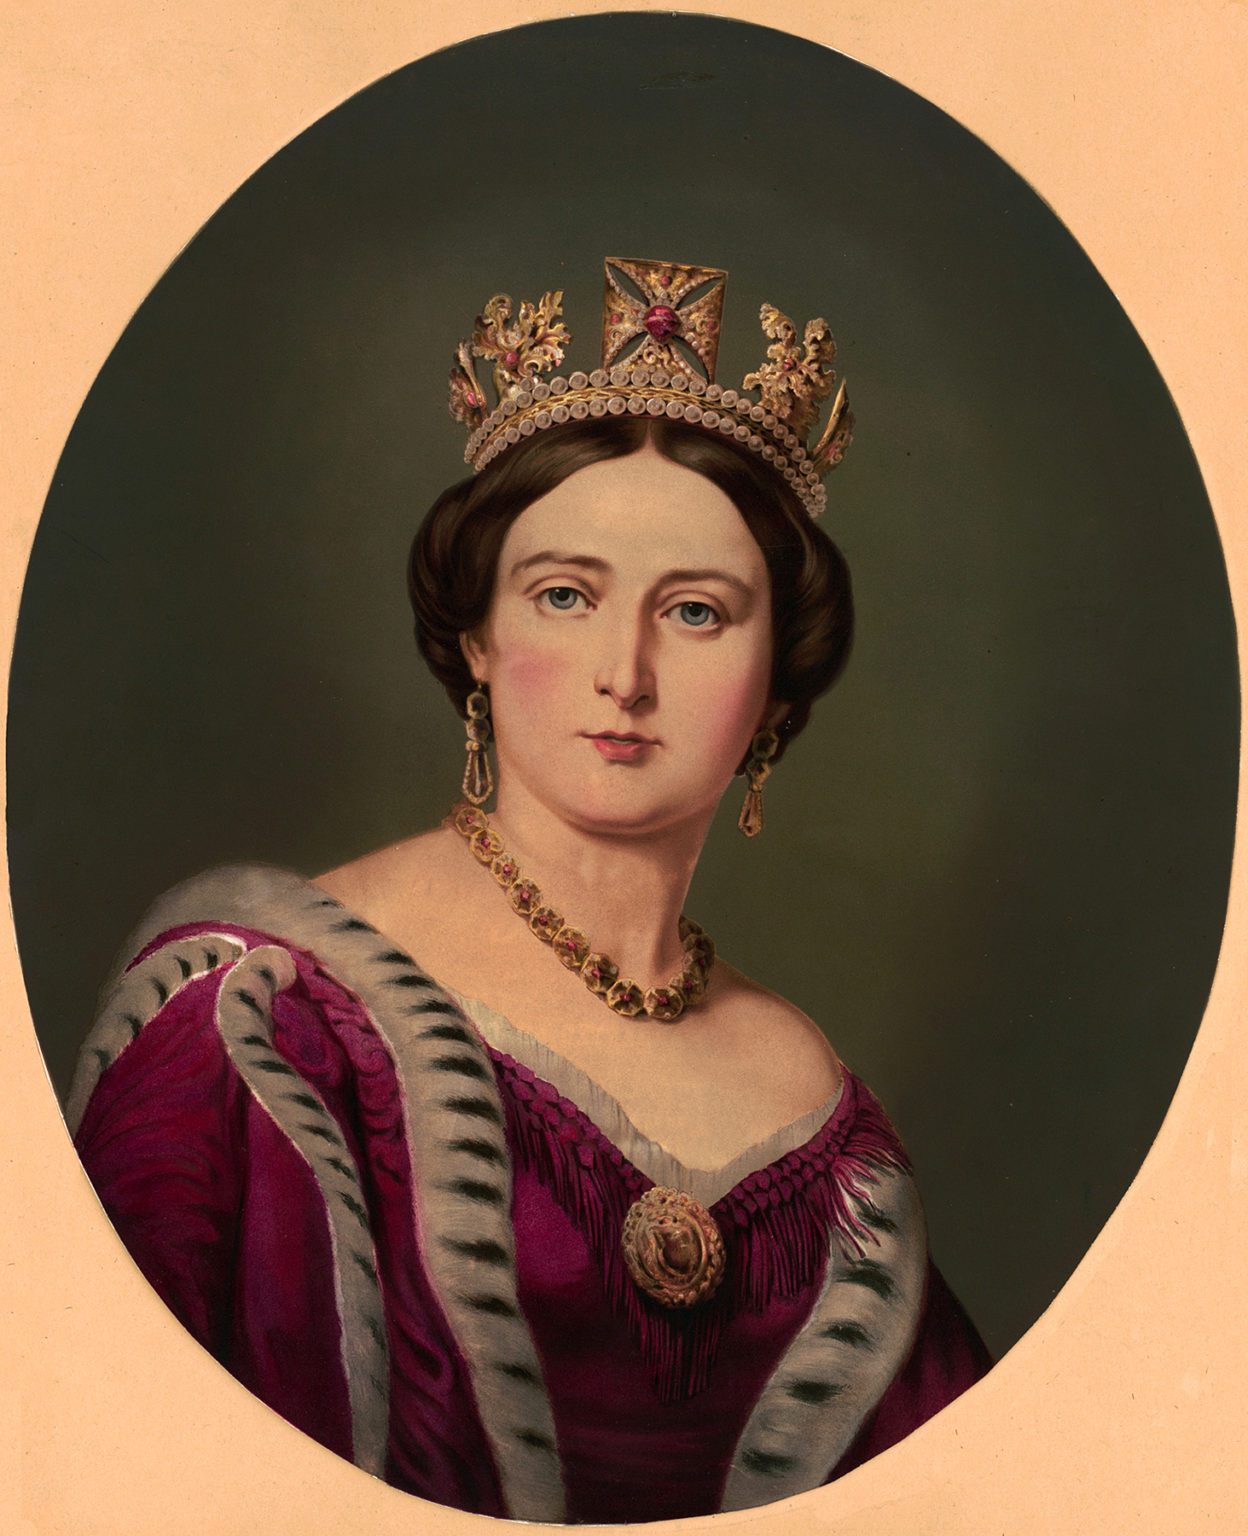 6 Queen Victoria Images - Updated! - The Graphics Fairy